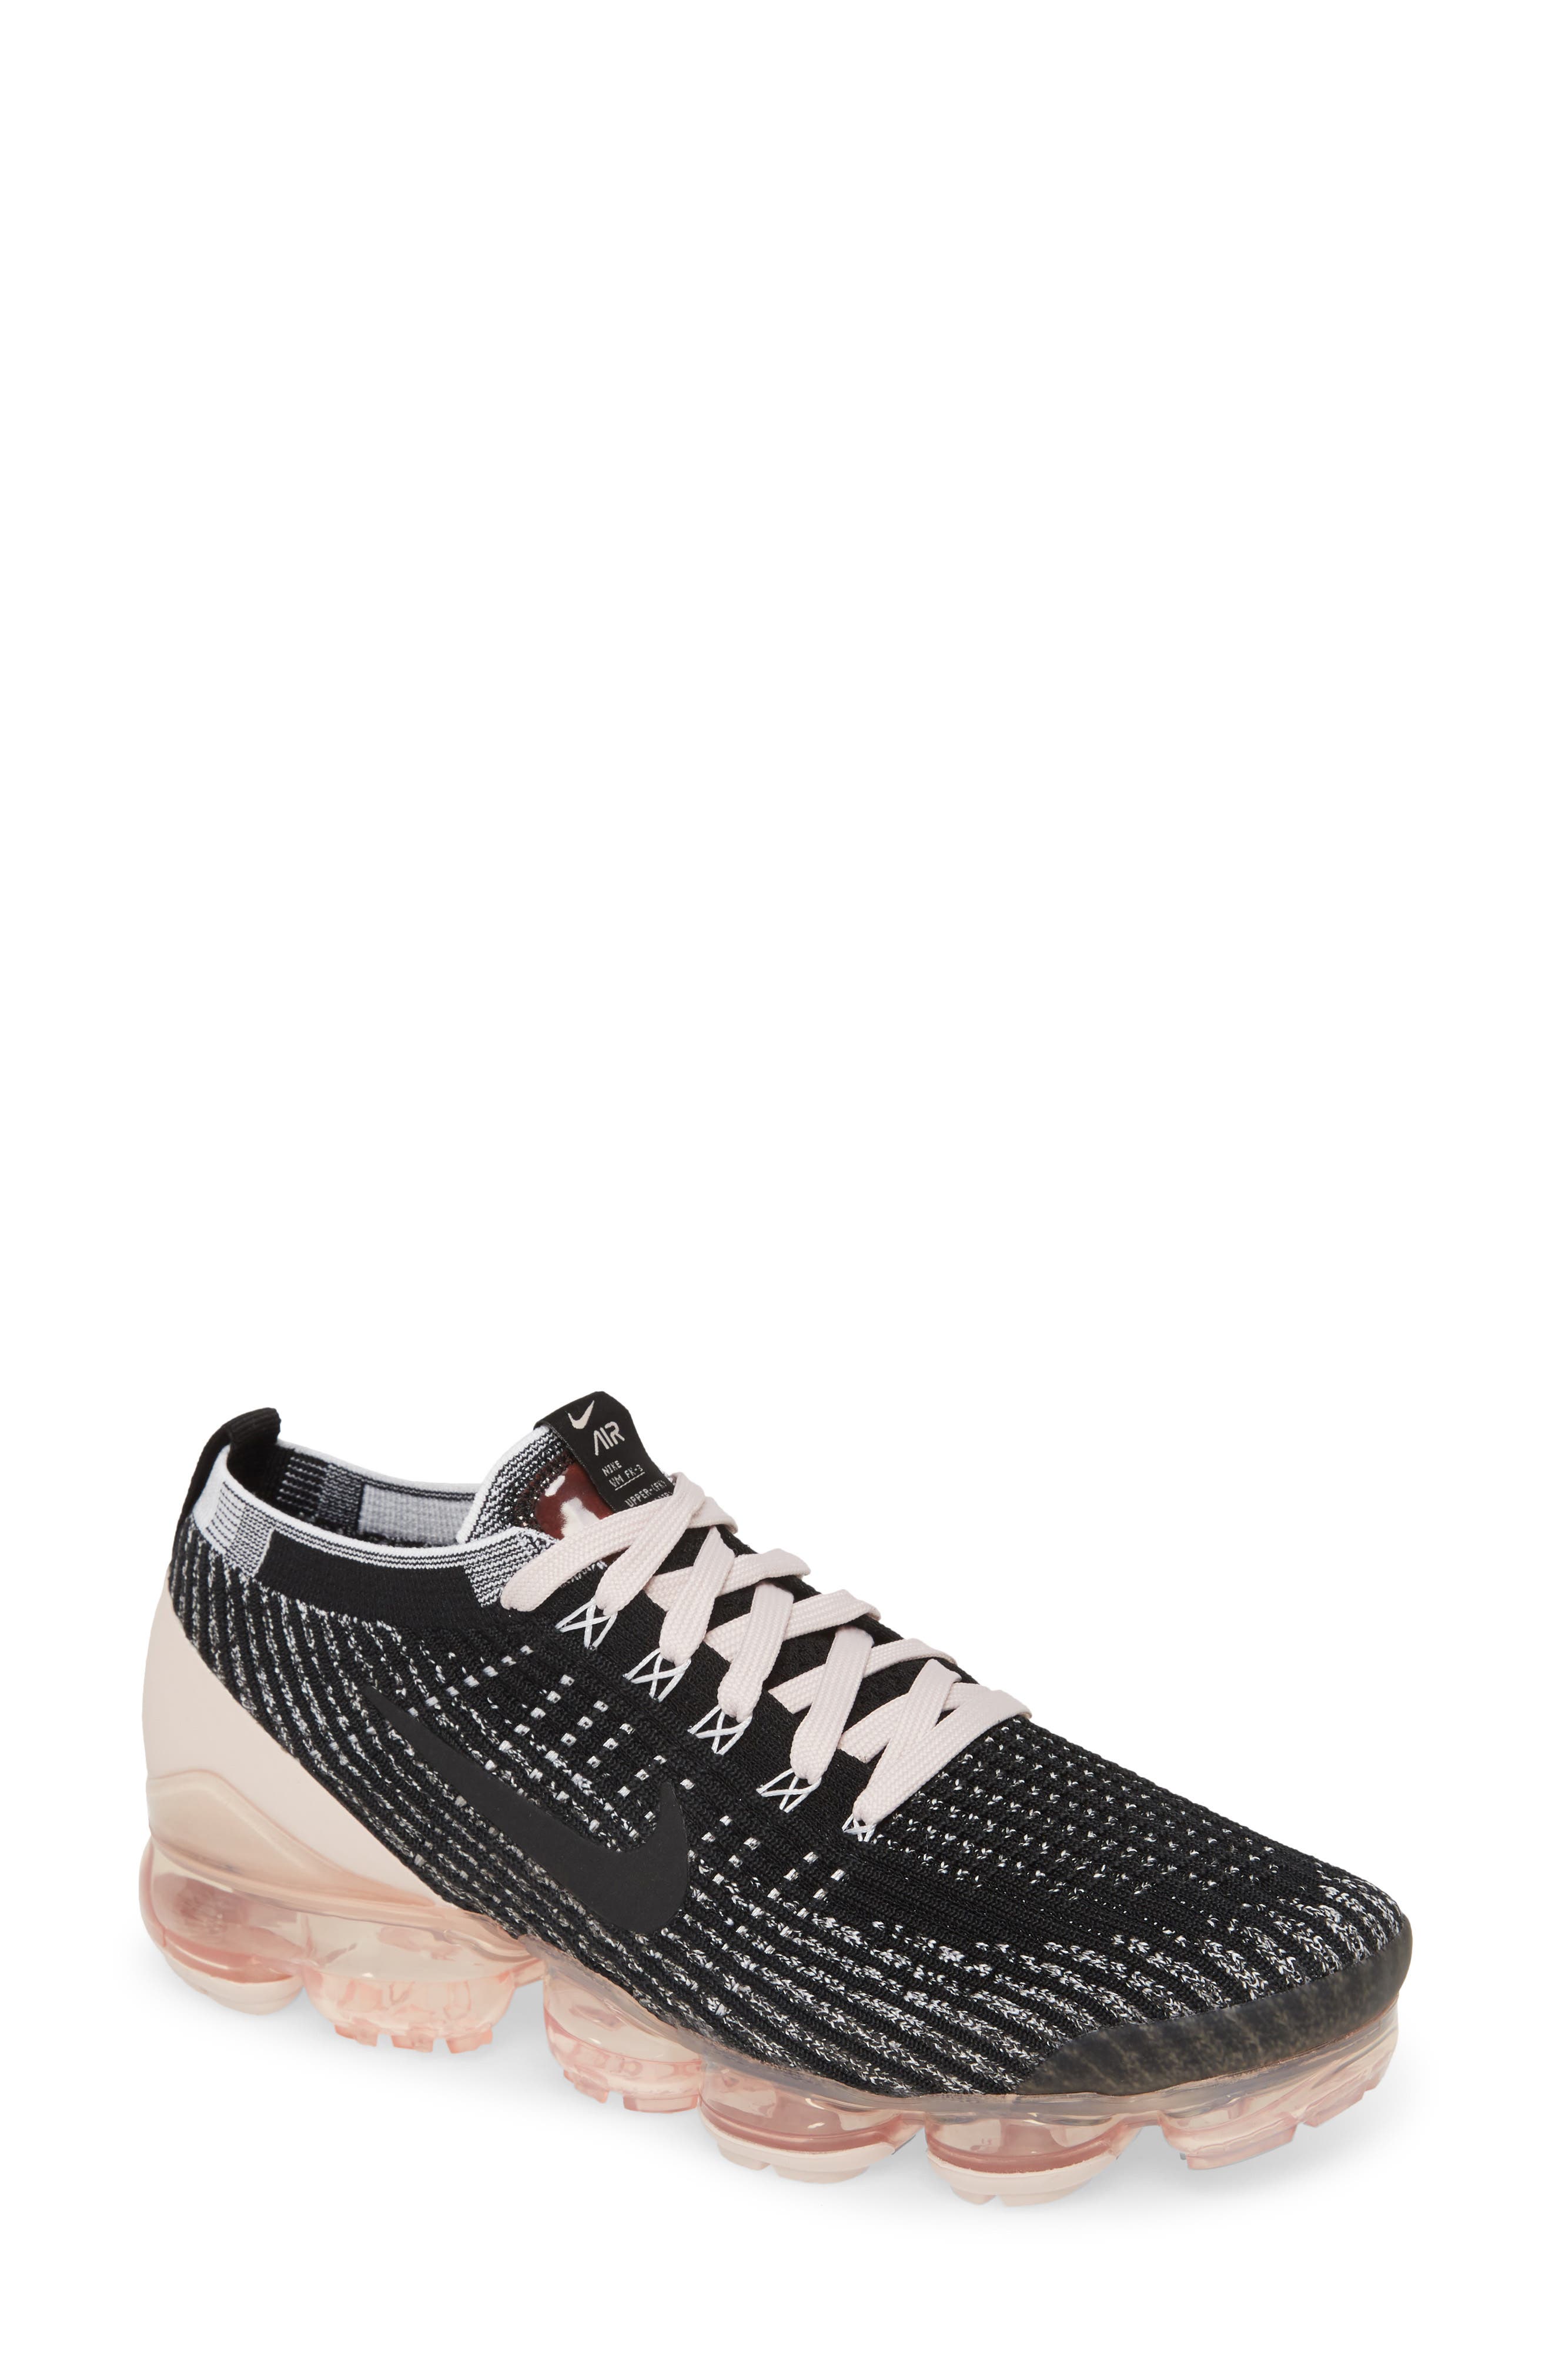 vapormax women's black and gold